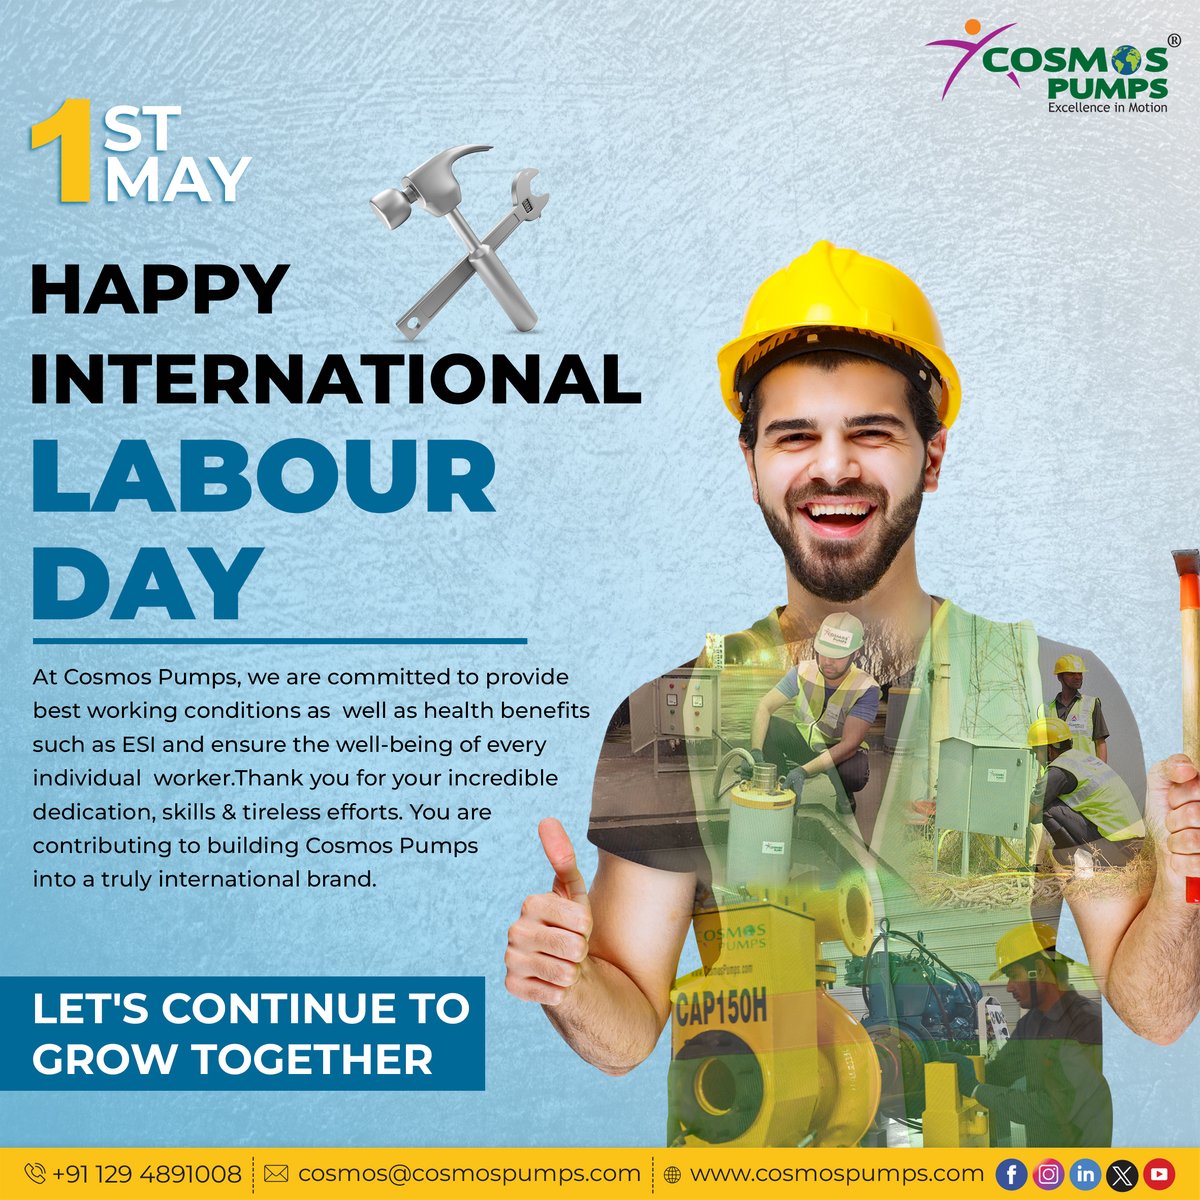 At Cosmos Pumps, we prioritize the well-being of every individual worker. 

For more information
☎ 0129-4891008
✉ cosmos@cosmospumps.com
🌐 cosmospumps.com

#cosmospumps #LabourDay #InternationalWorkersDay #WorkersRights #LabourRights #UnionStrong #WorkforceEquality